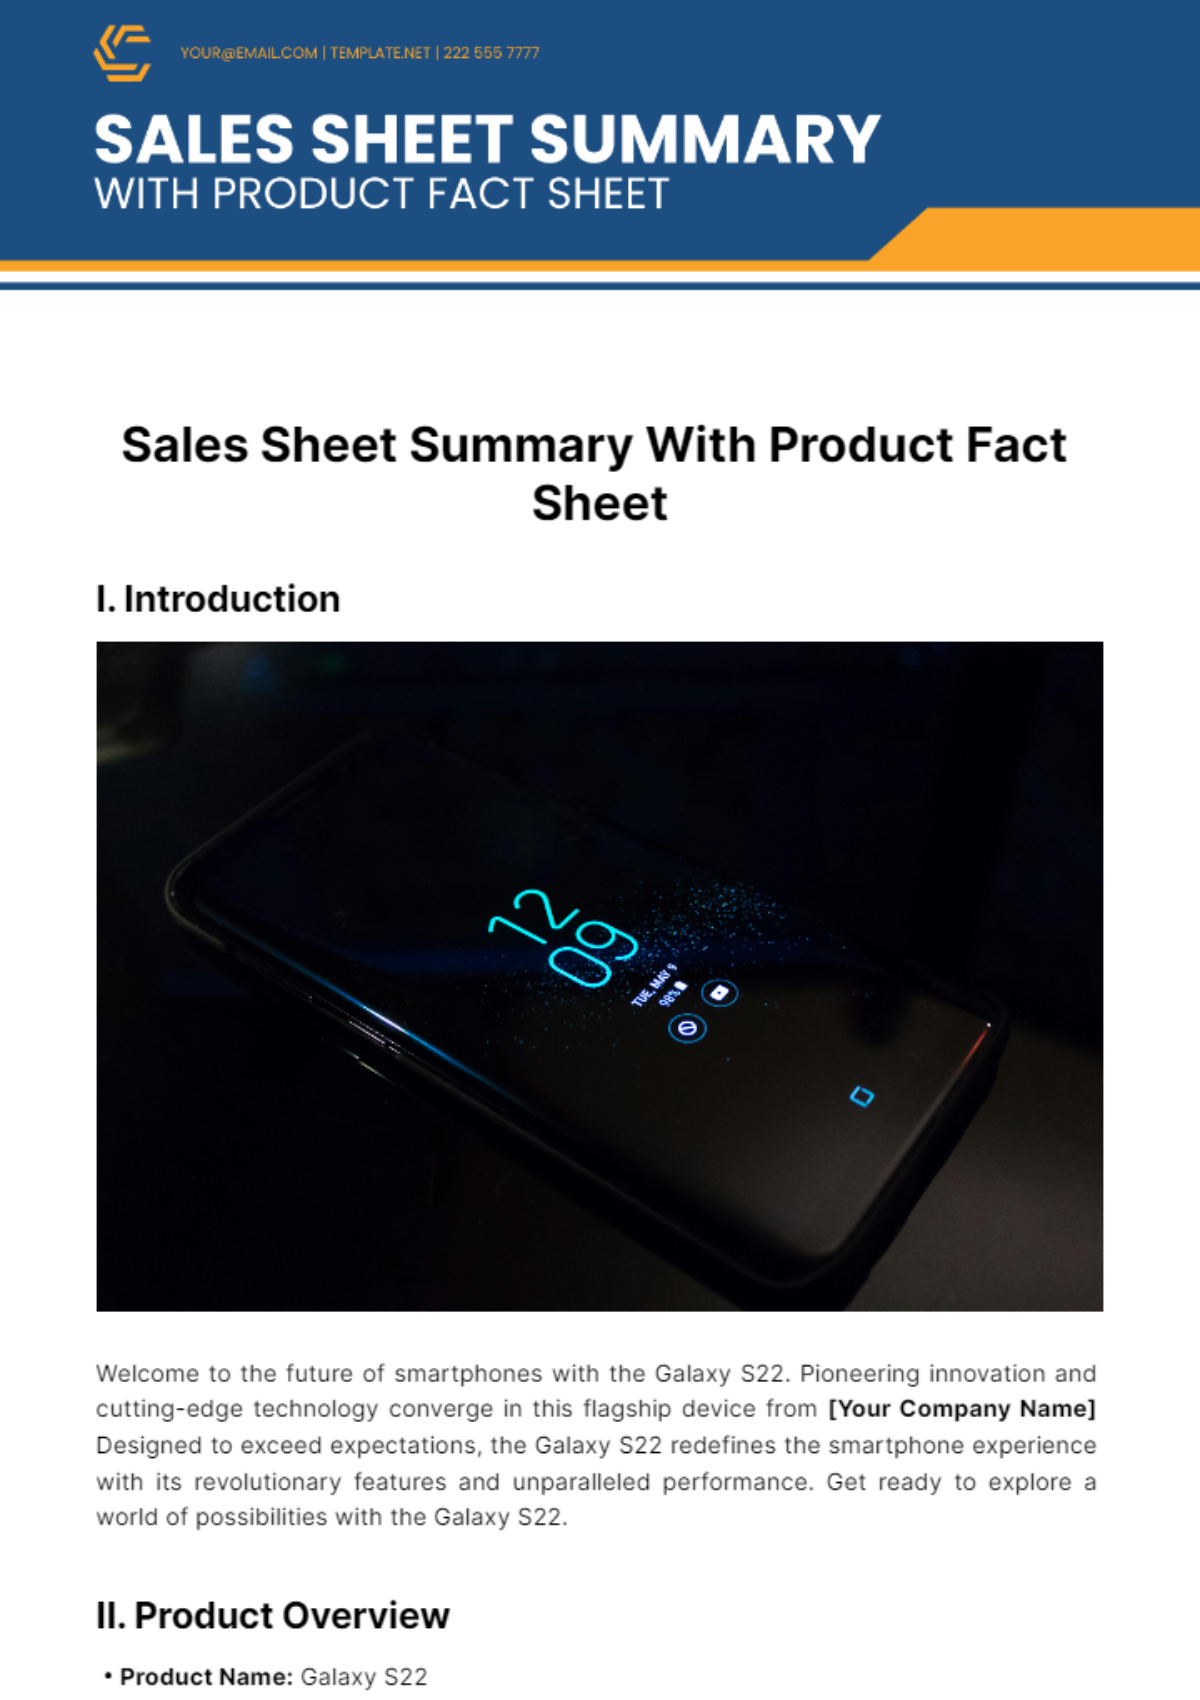 Sales Sheet Summary With Product Fact Sheet Template